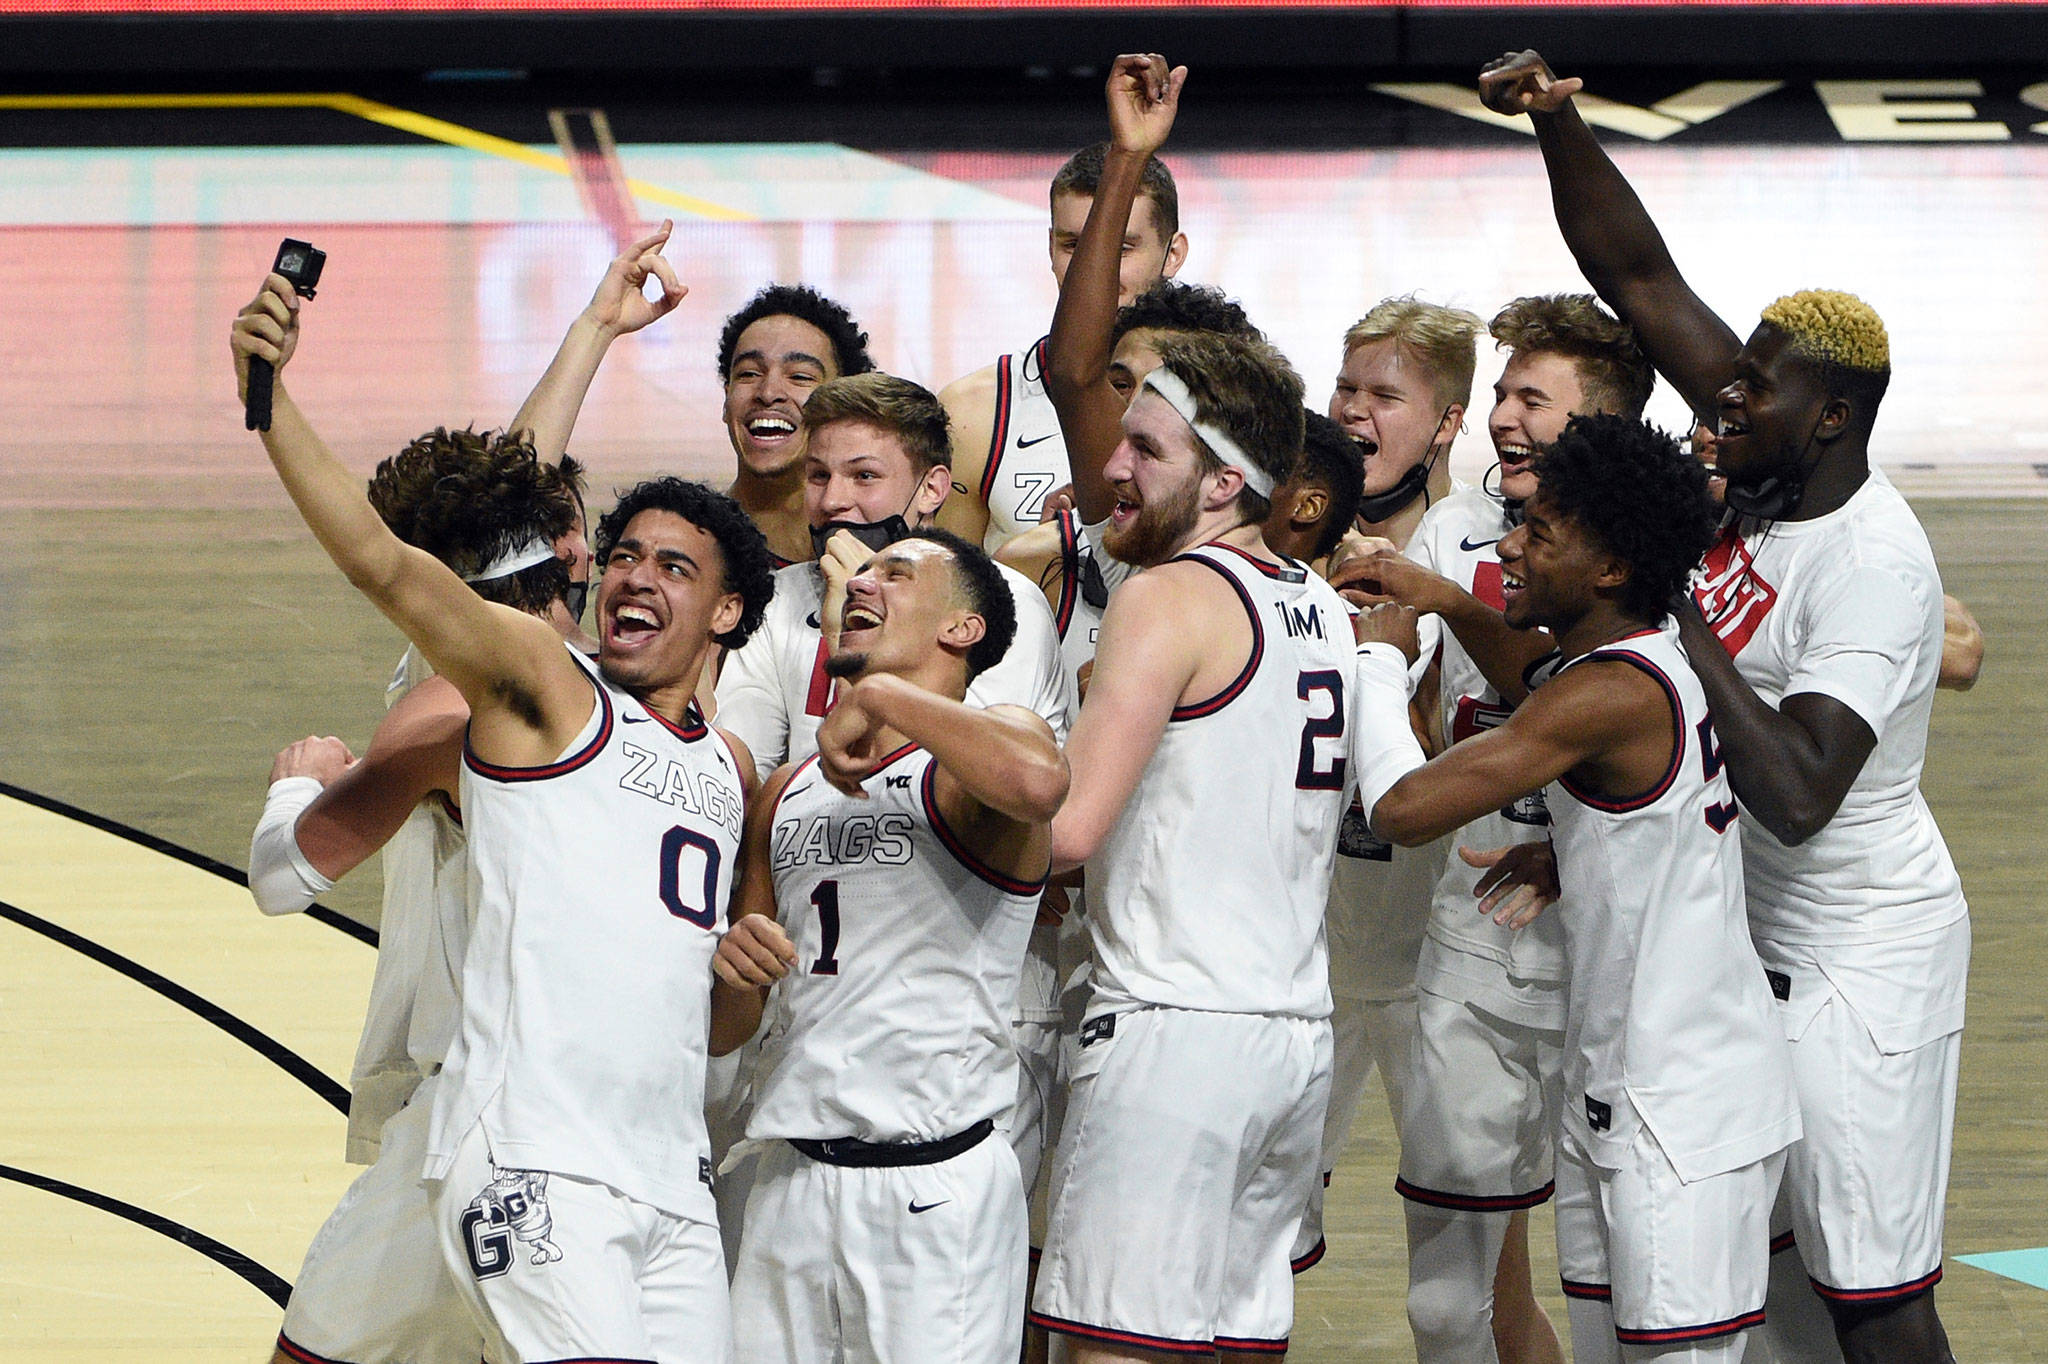 Gonzaga players celebrate after defeating BYU in the West Coast Conference championship game on March 9, 2021, in Las Vegas. (AP Photo/David Becker)